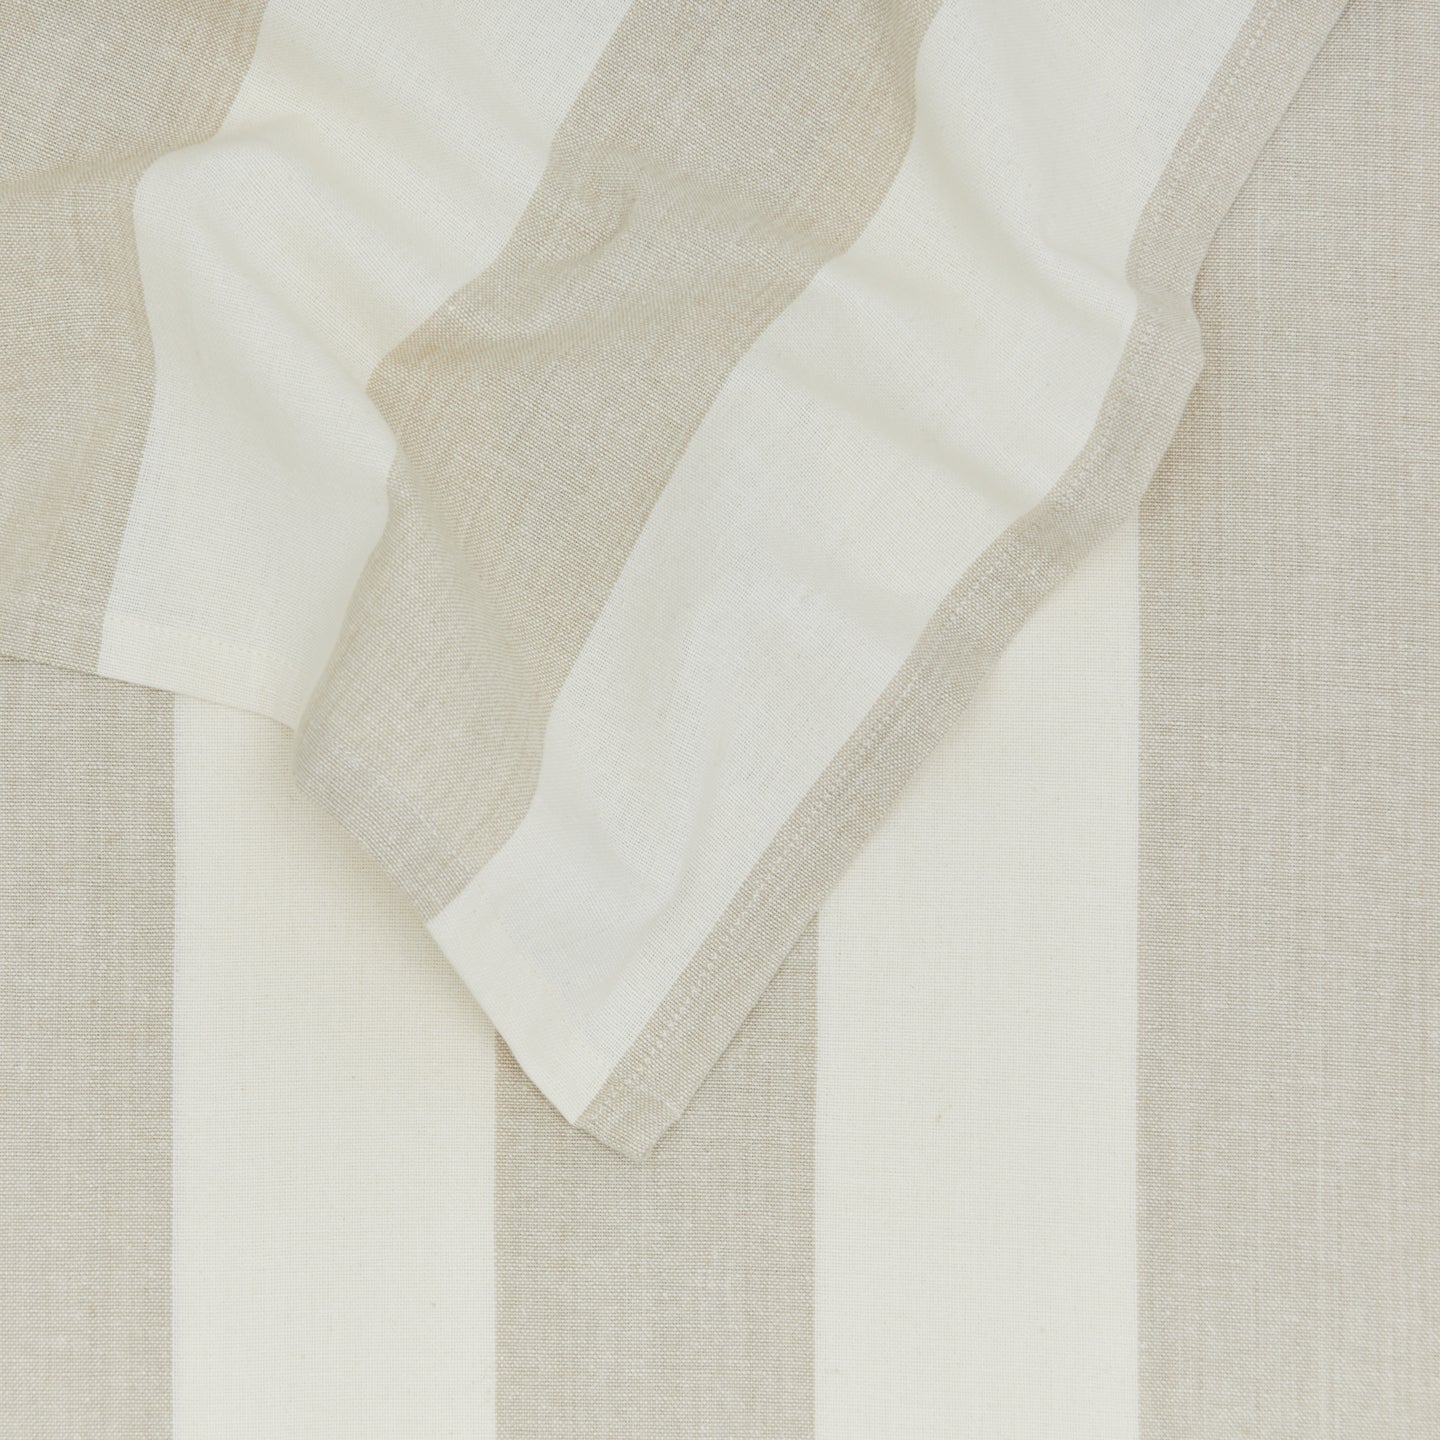 Essential Striped Tablecloth - Ivory/Flax